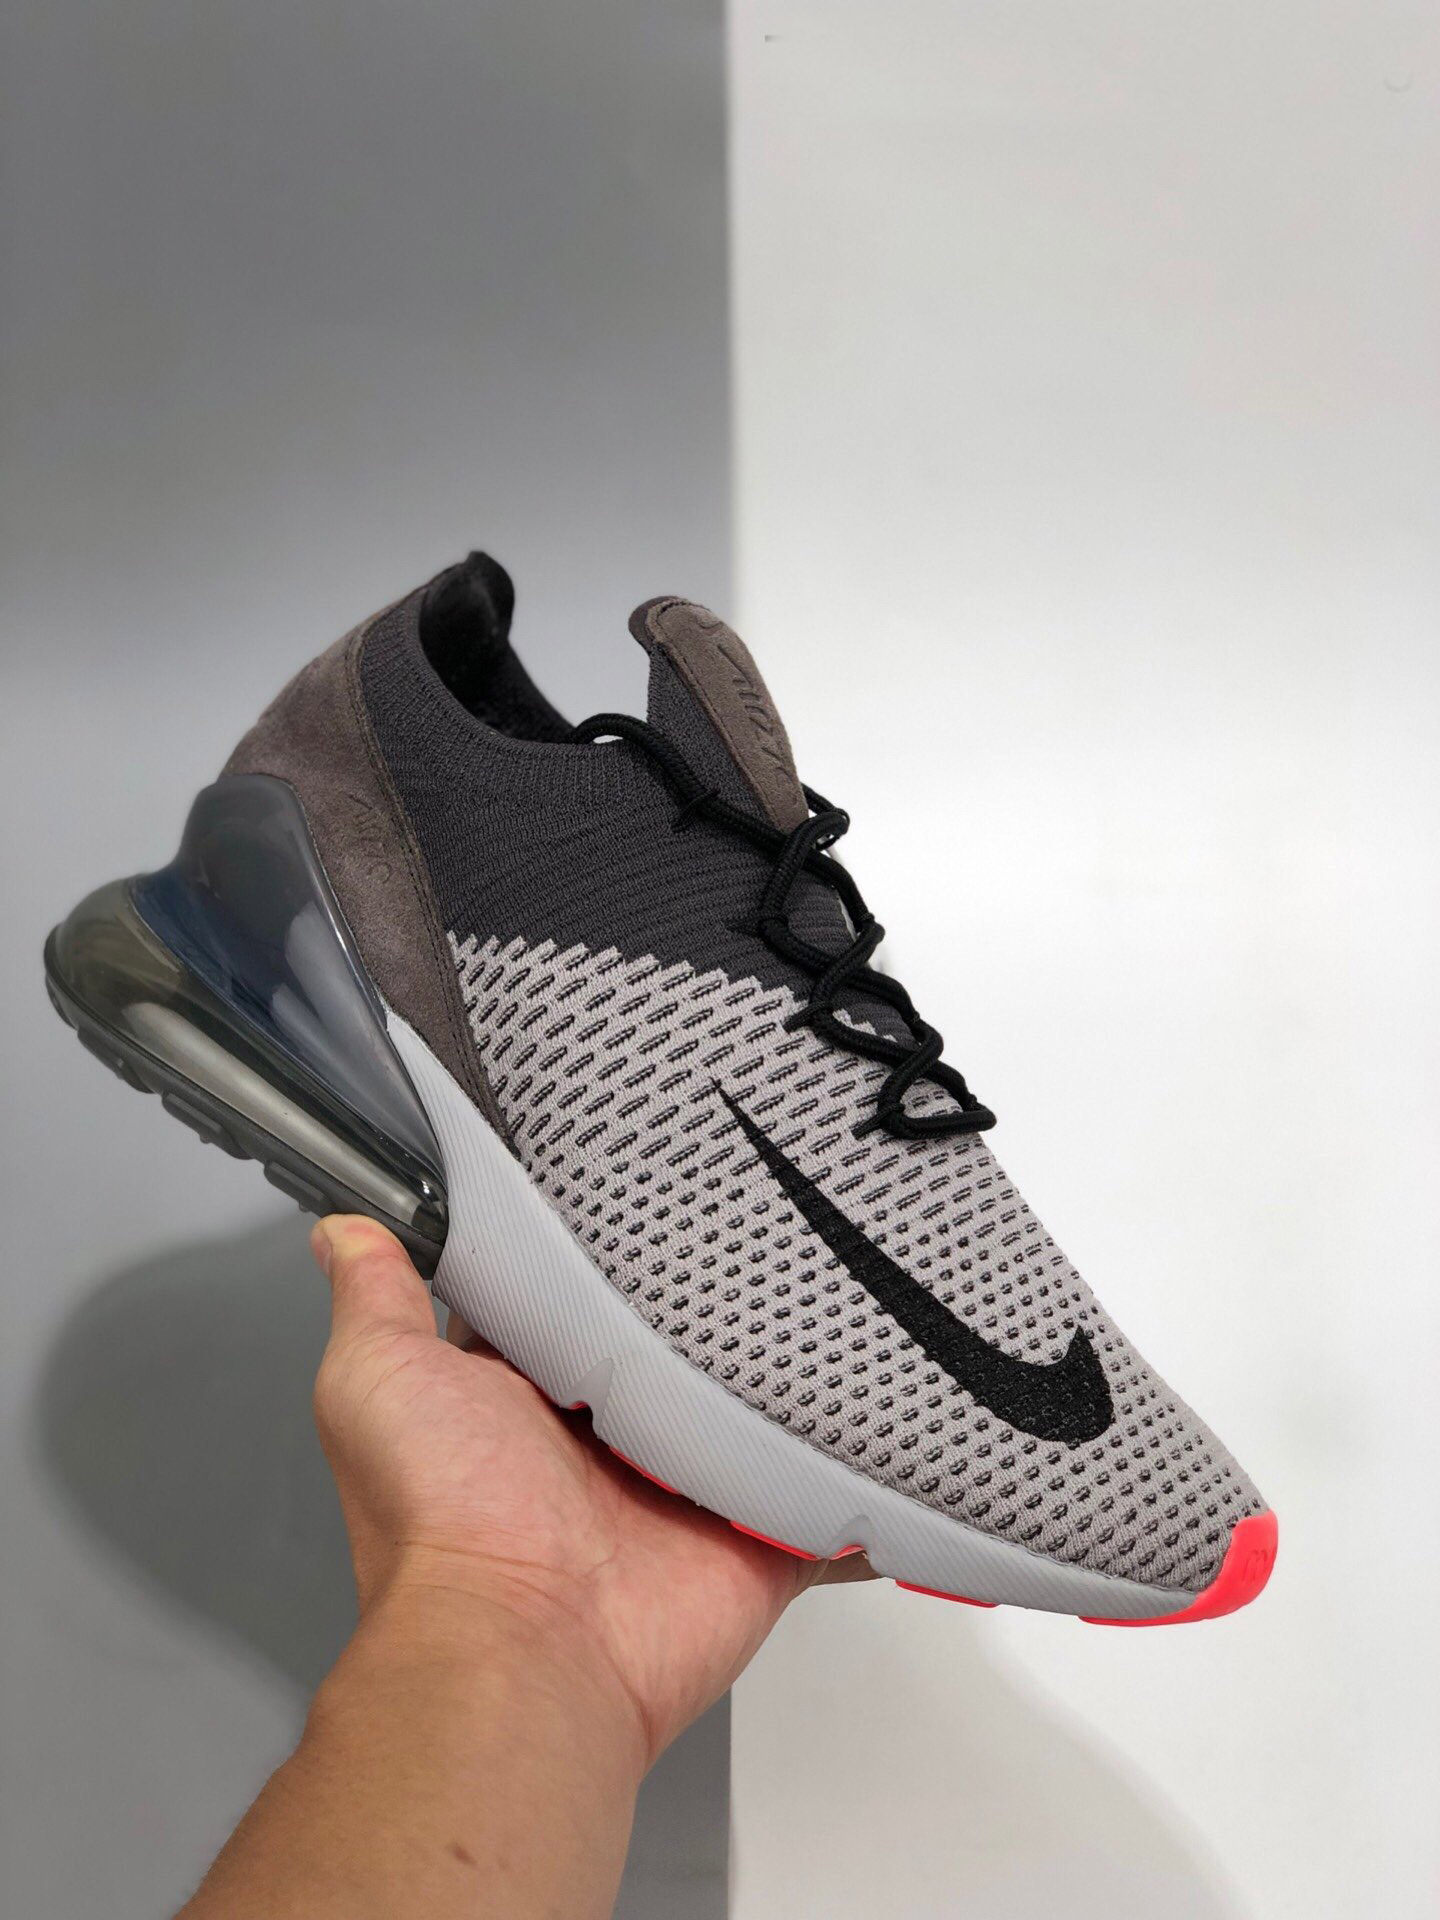 nike air max 270 flyknit for sale